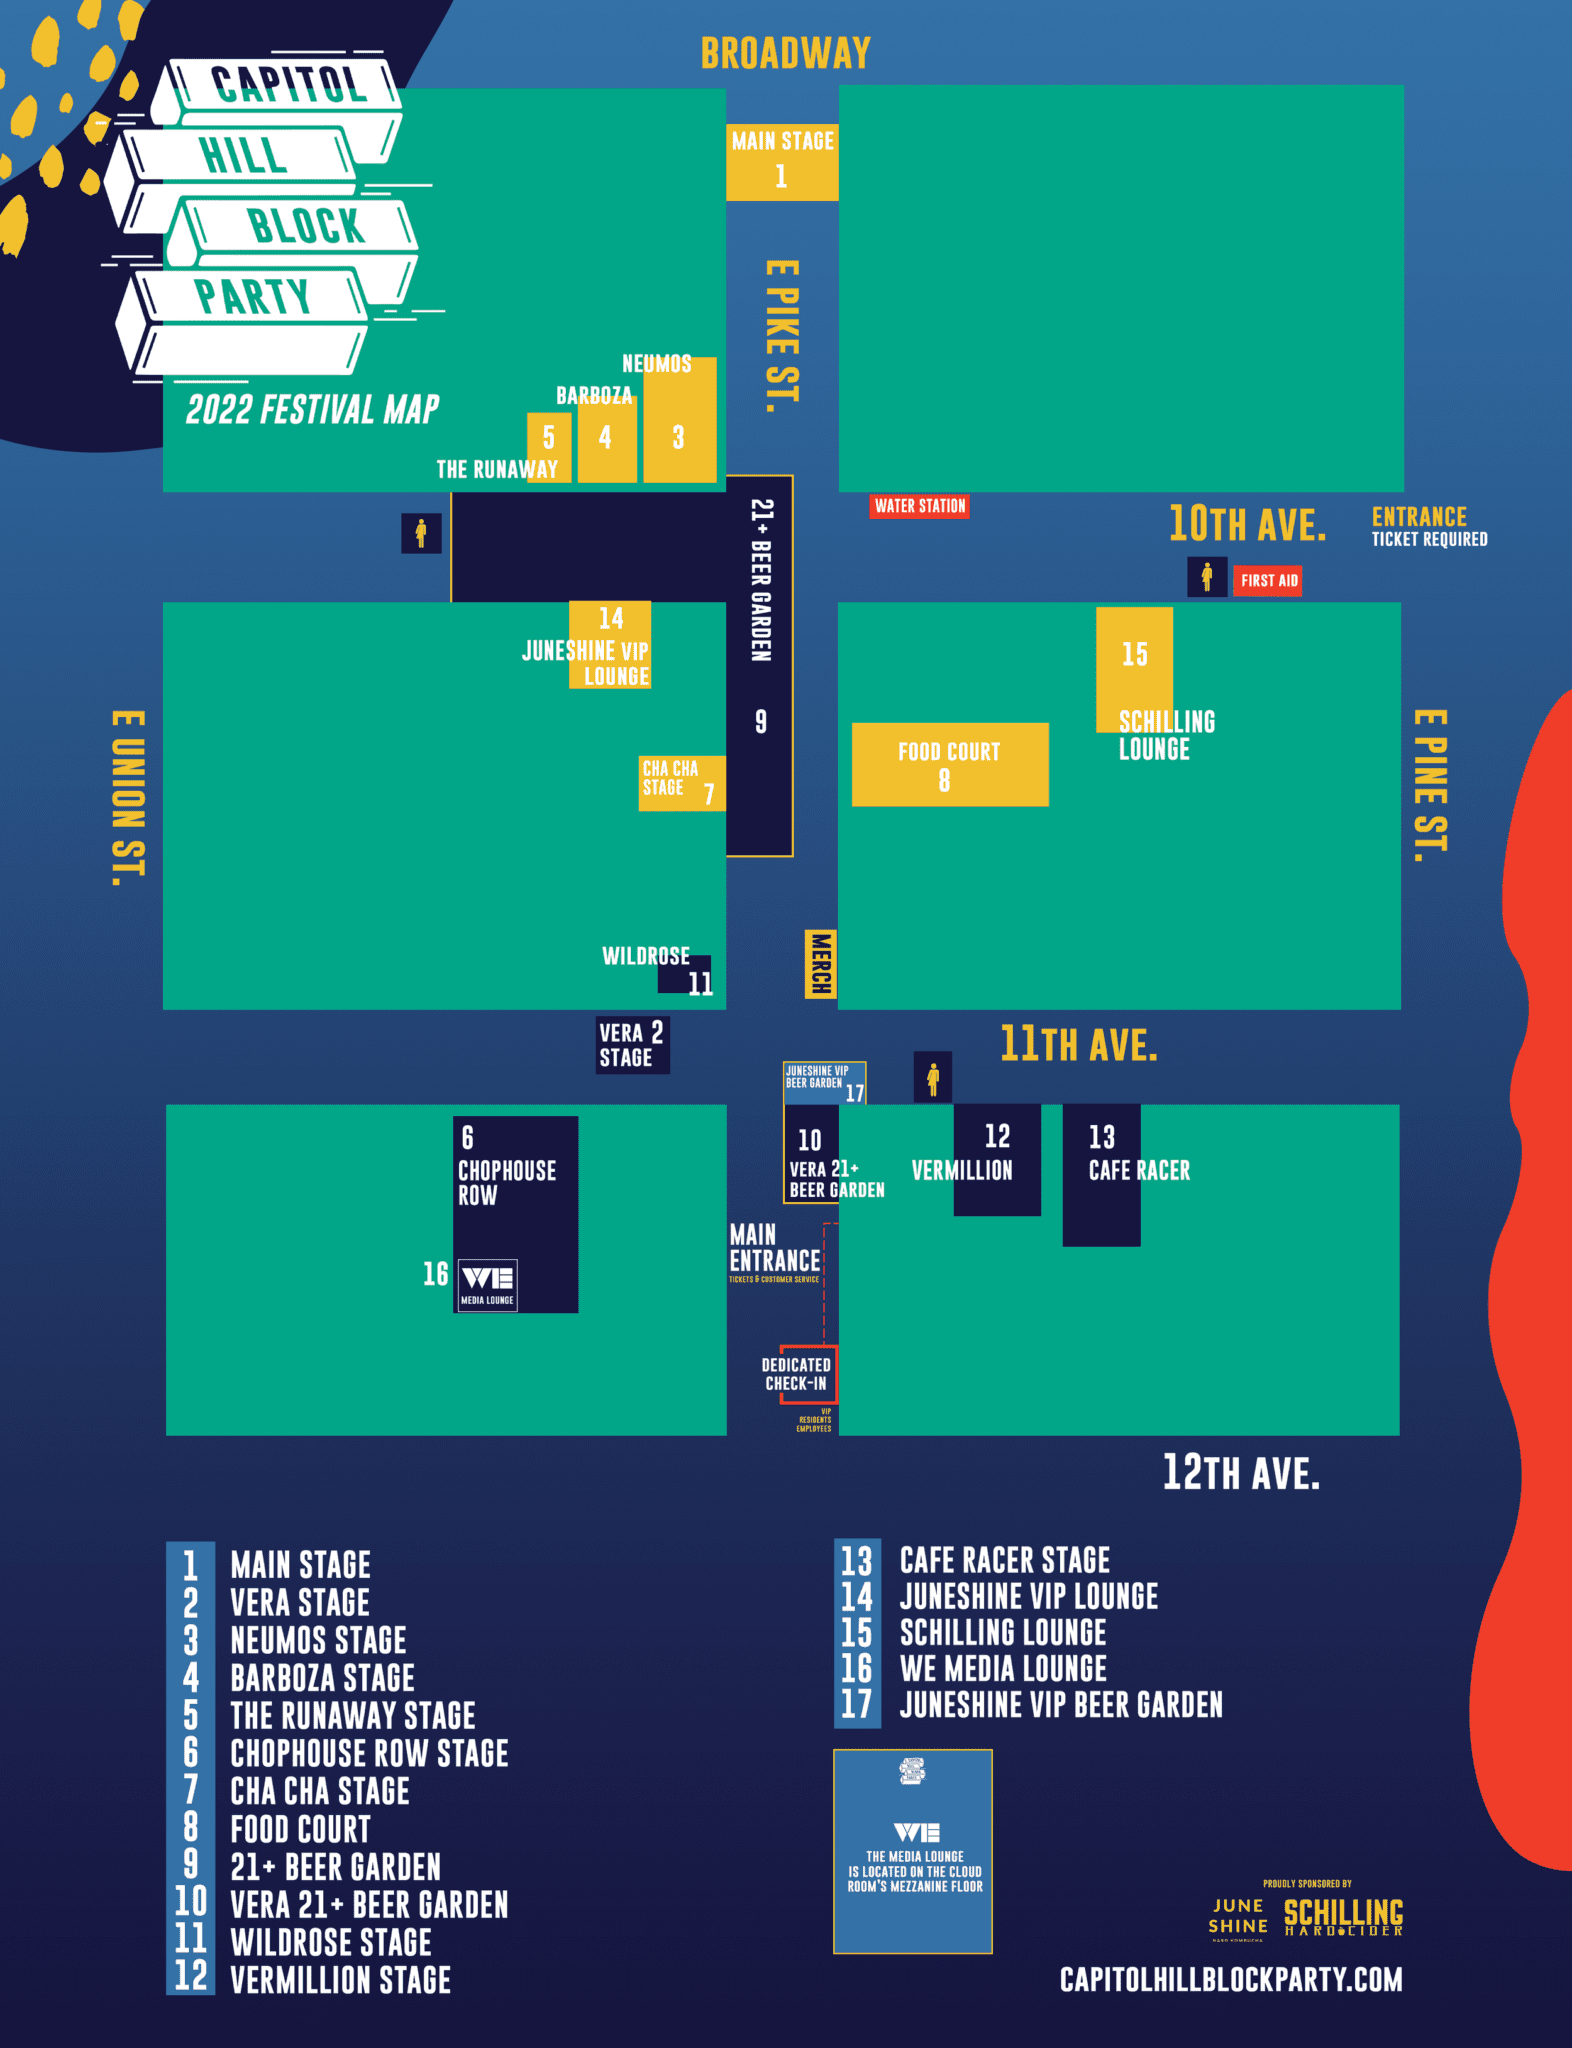 A map of the Capitol Hill Block Party streets and festival layout.